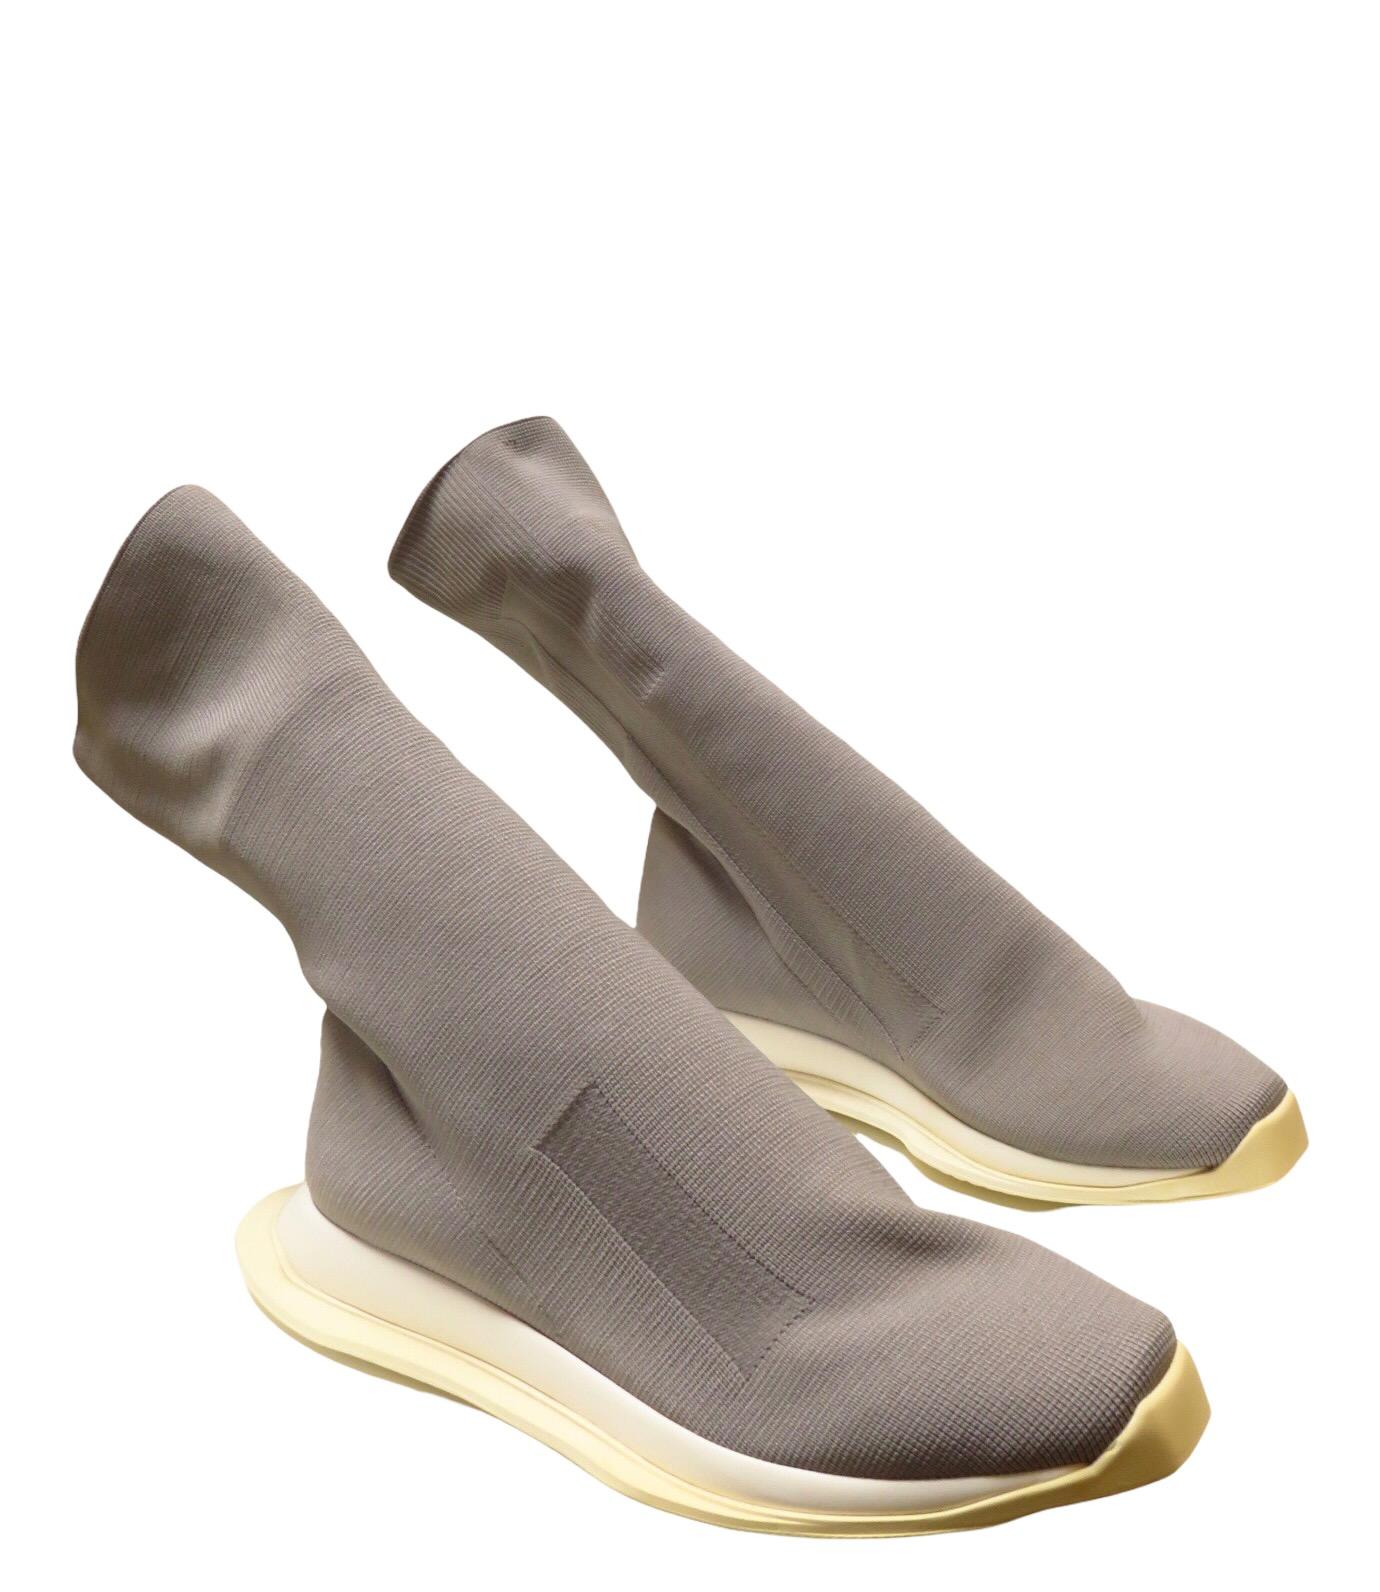 Rick Owens DRKSHDW Runner Stretch Low Sock Boot In New Condition For Sale In Laguna Beach, CA